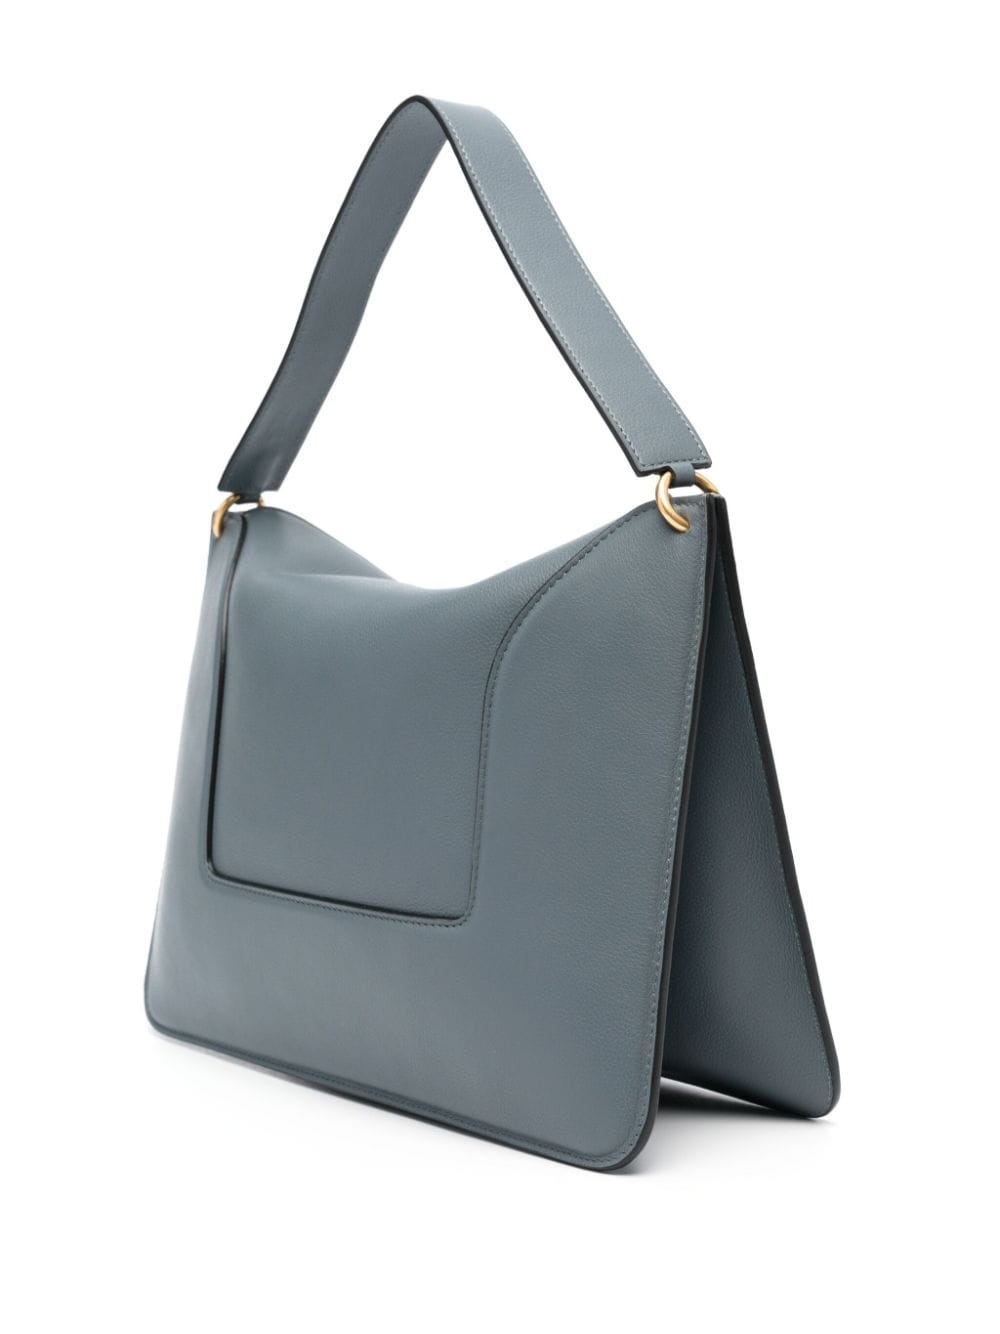 Penelope leather tote bag - 3